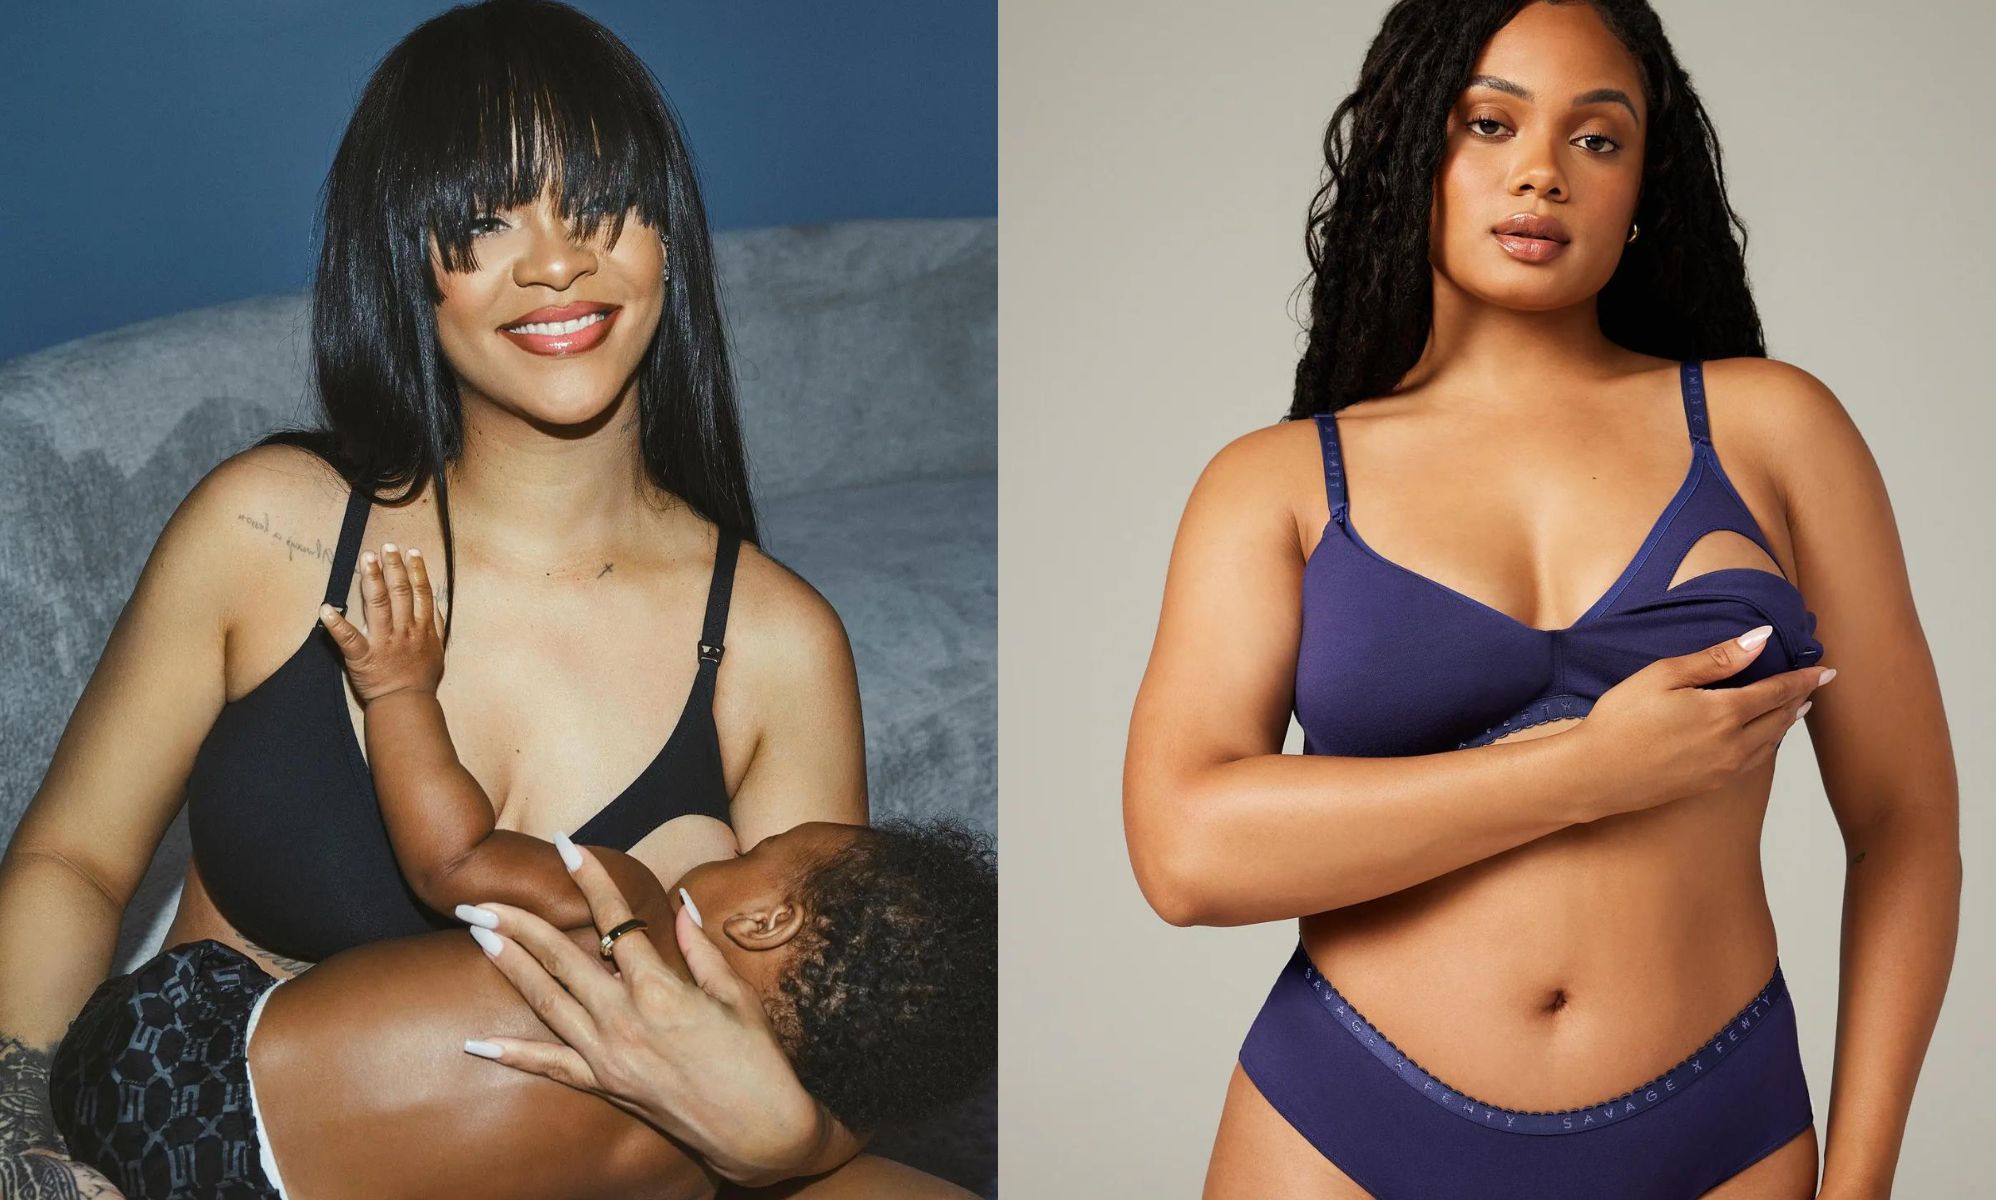 Rihanna's lingerie line is exactly what her fans want